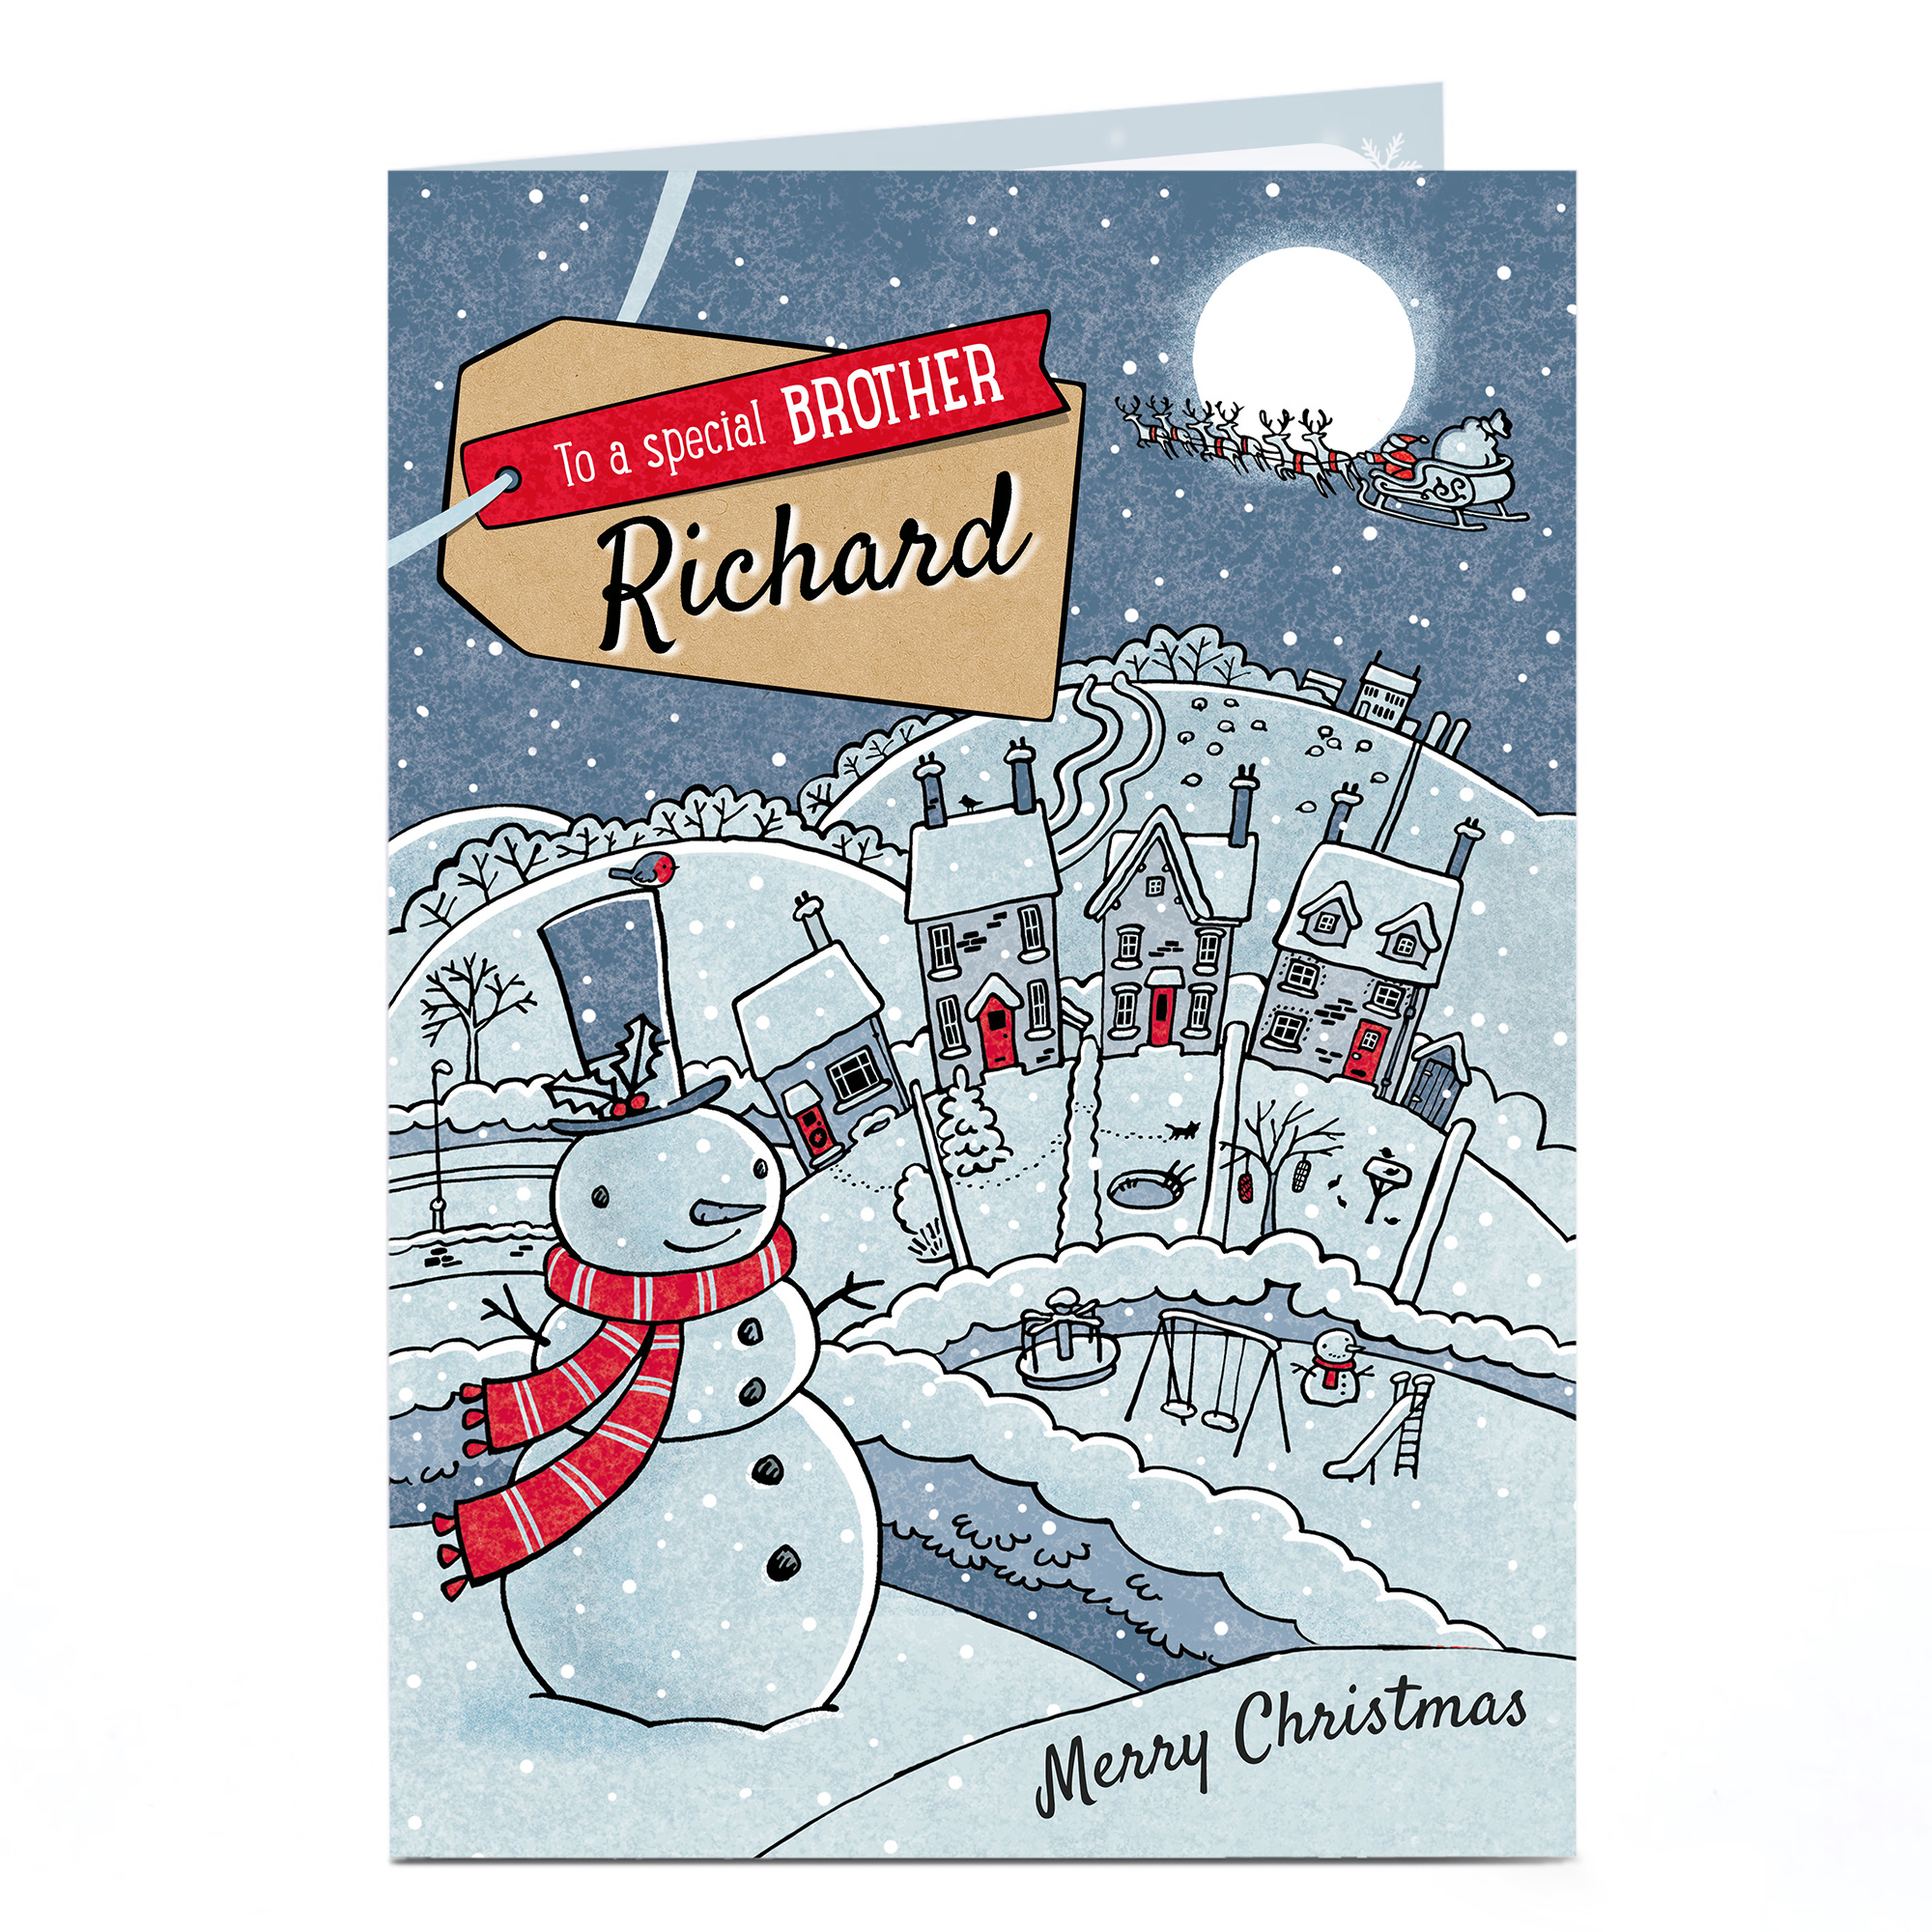 Personalised Christmas Card - Snowman and Name Tag